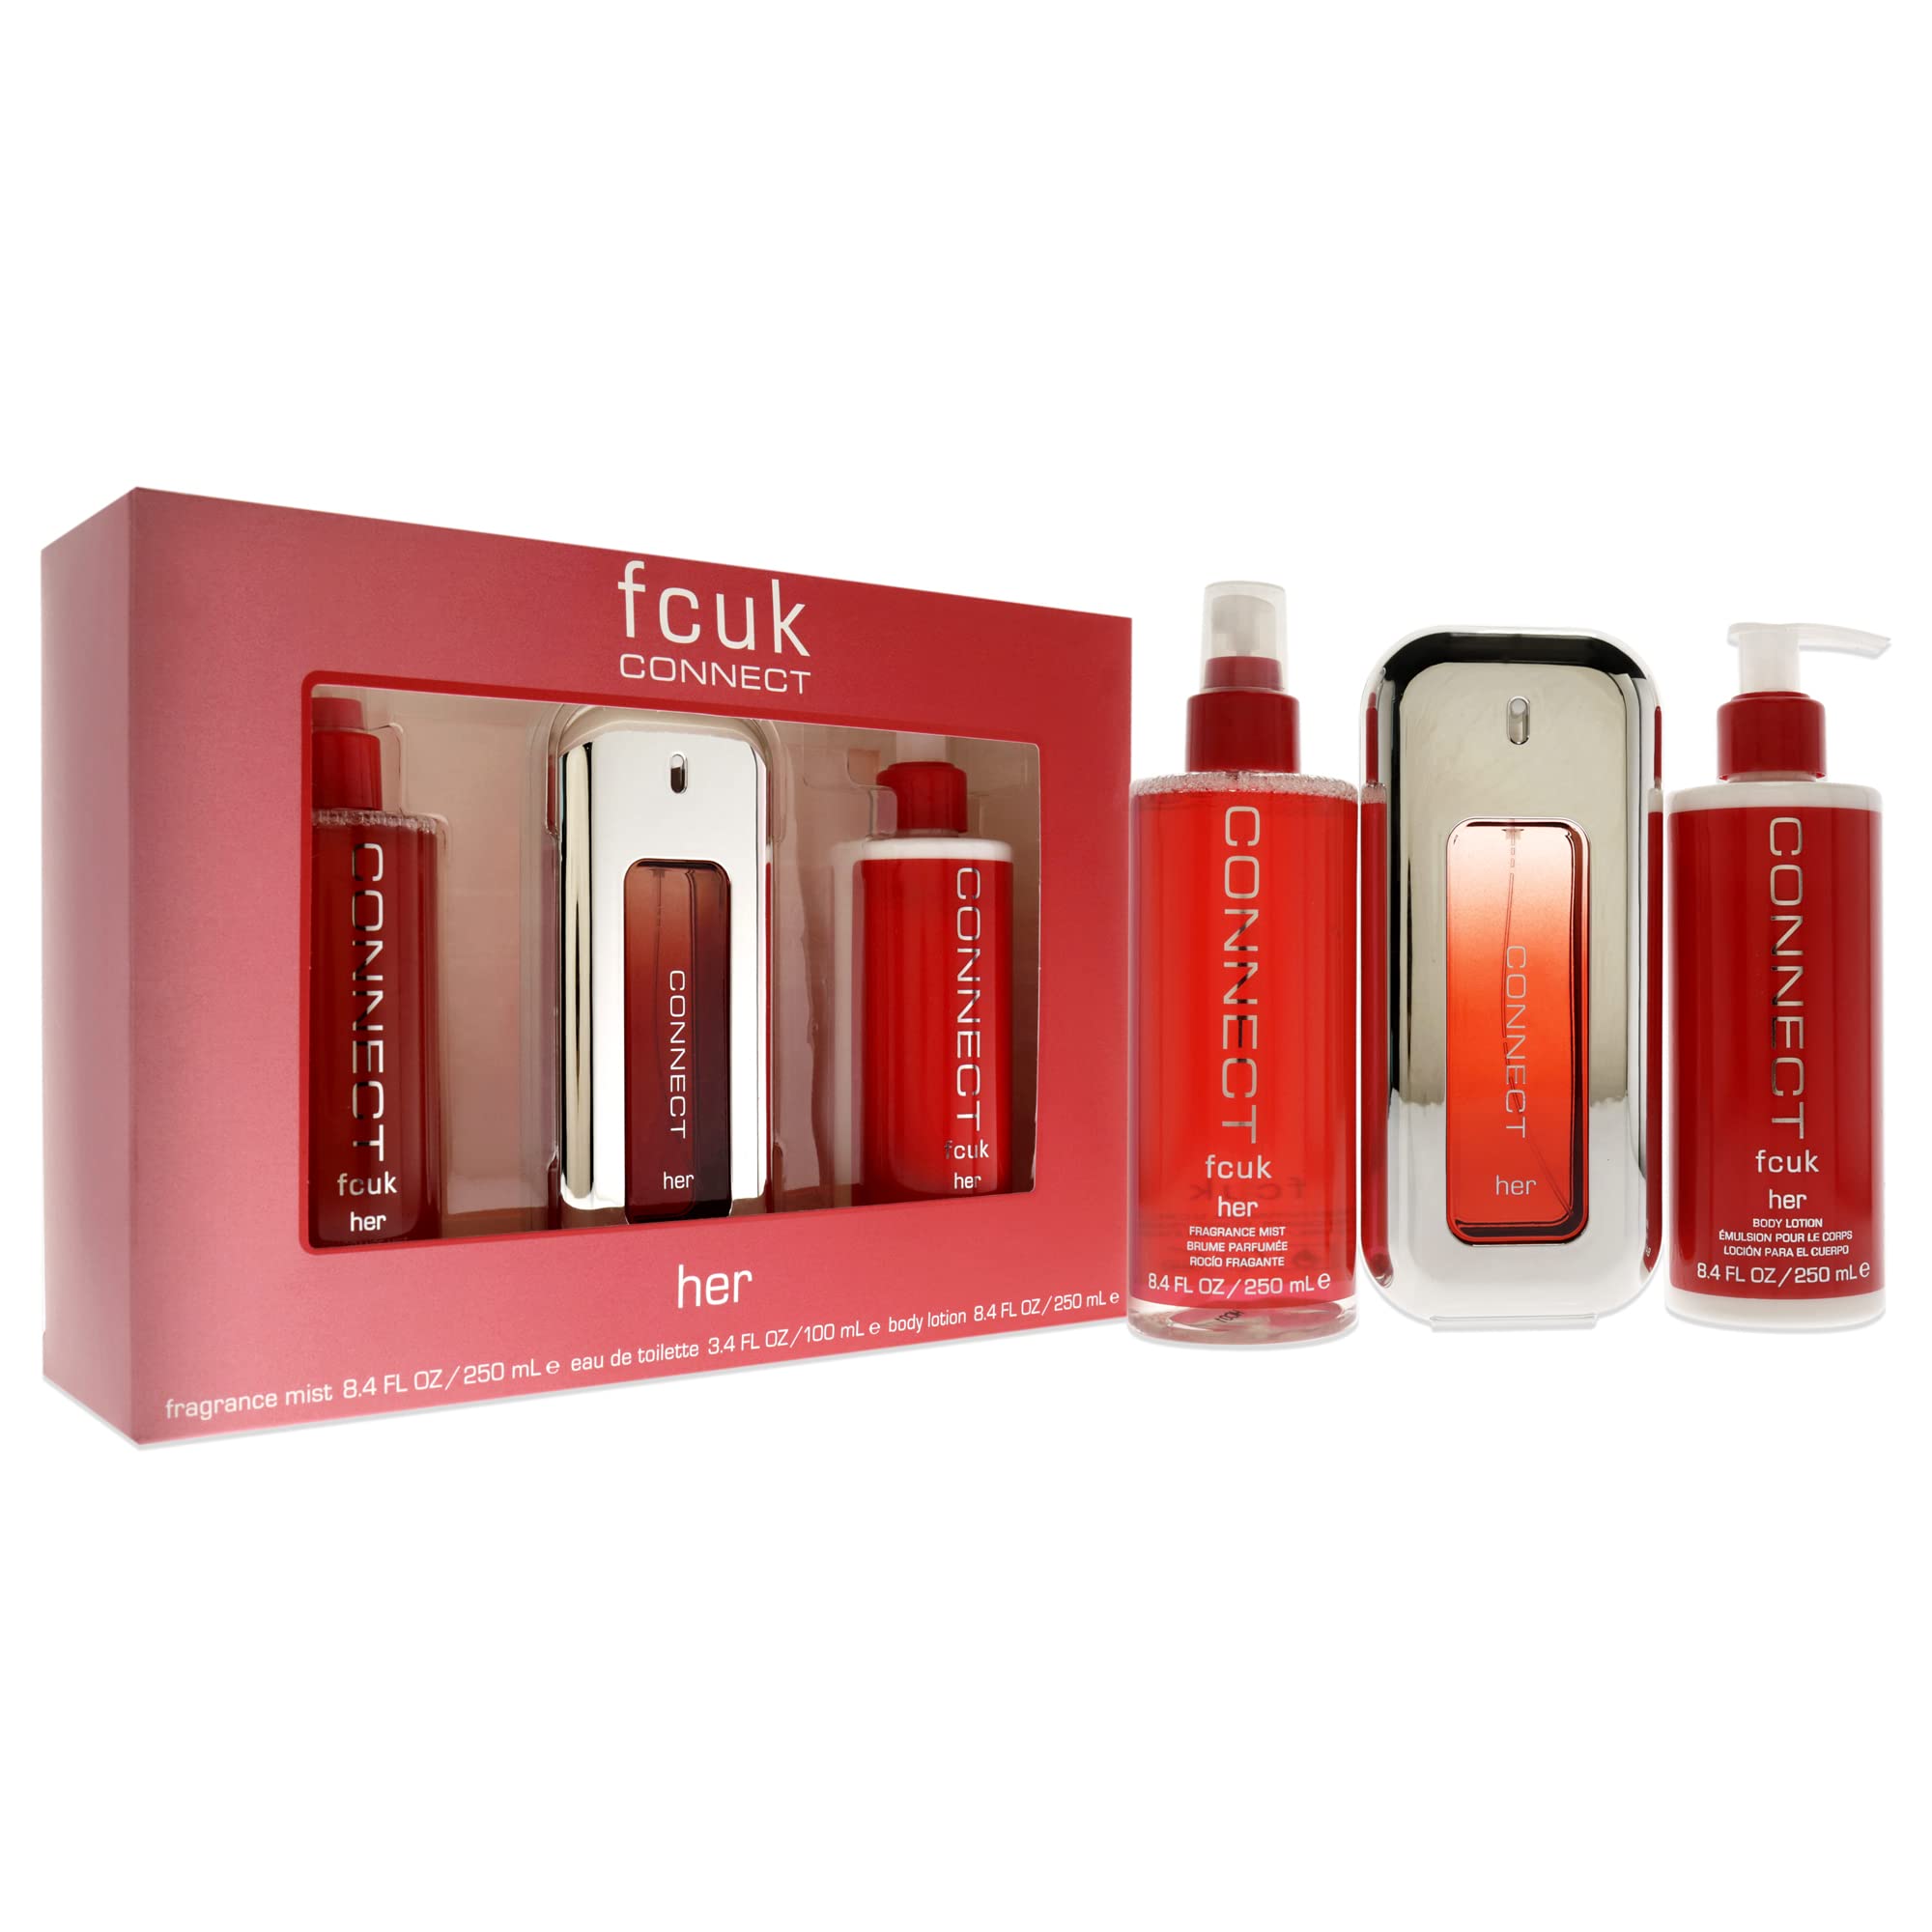 French Connection UK Fcuk Connect 3.4oz EDT Spray, 8.4oz Body Lotion, 8.4 Fragrance Mist Women 3 Pc Gift Set